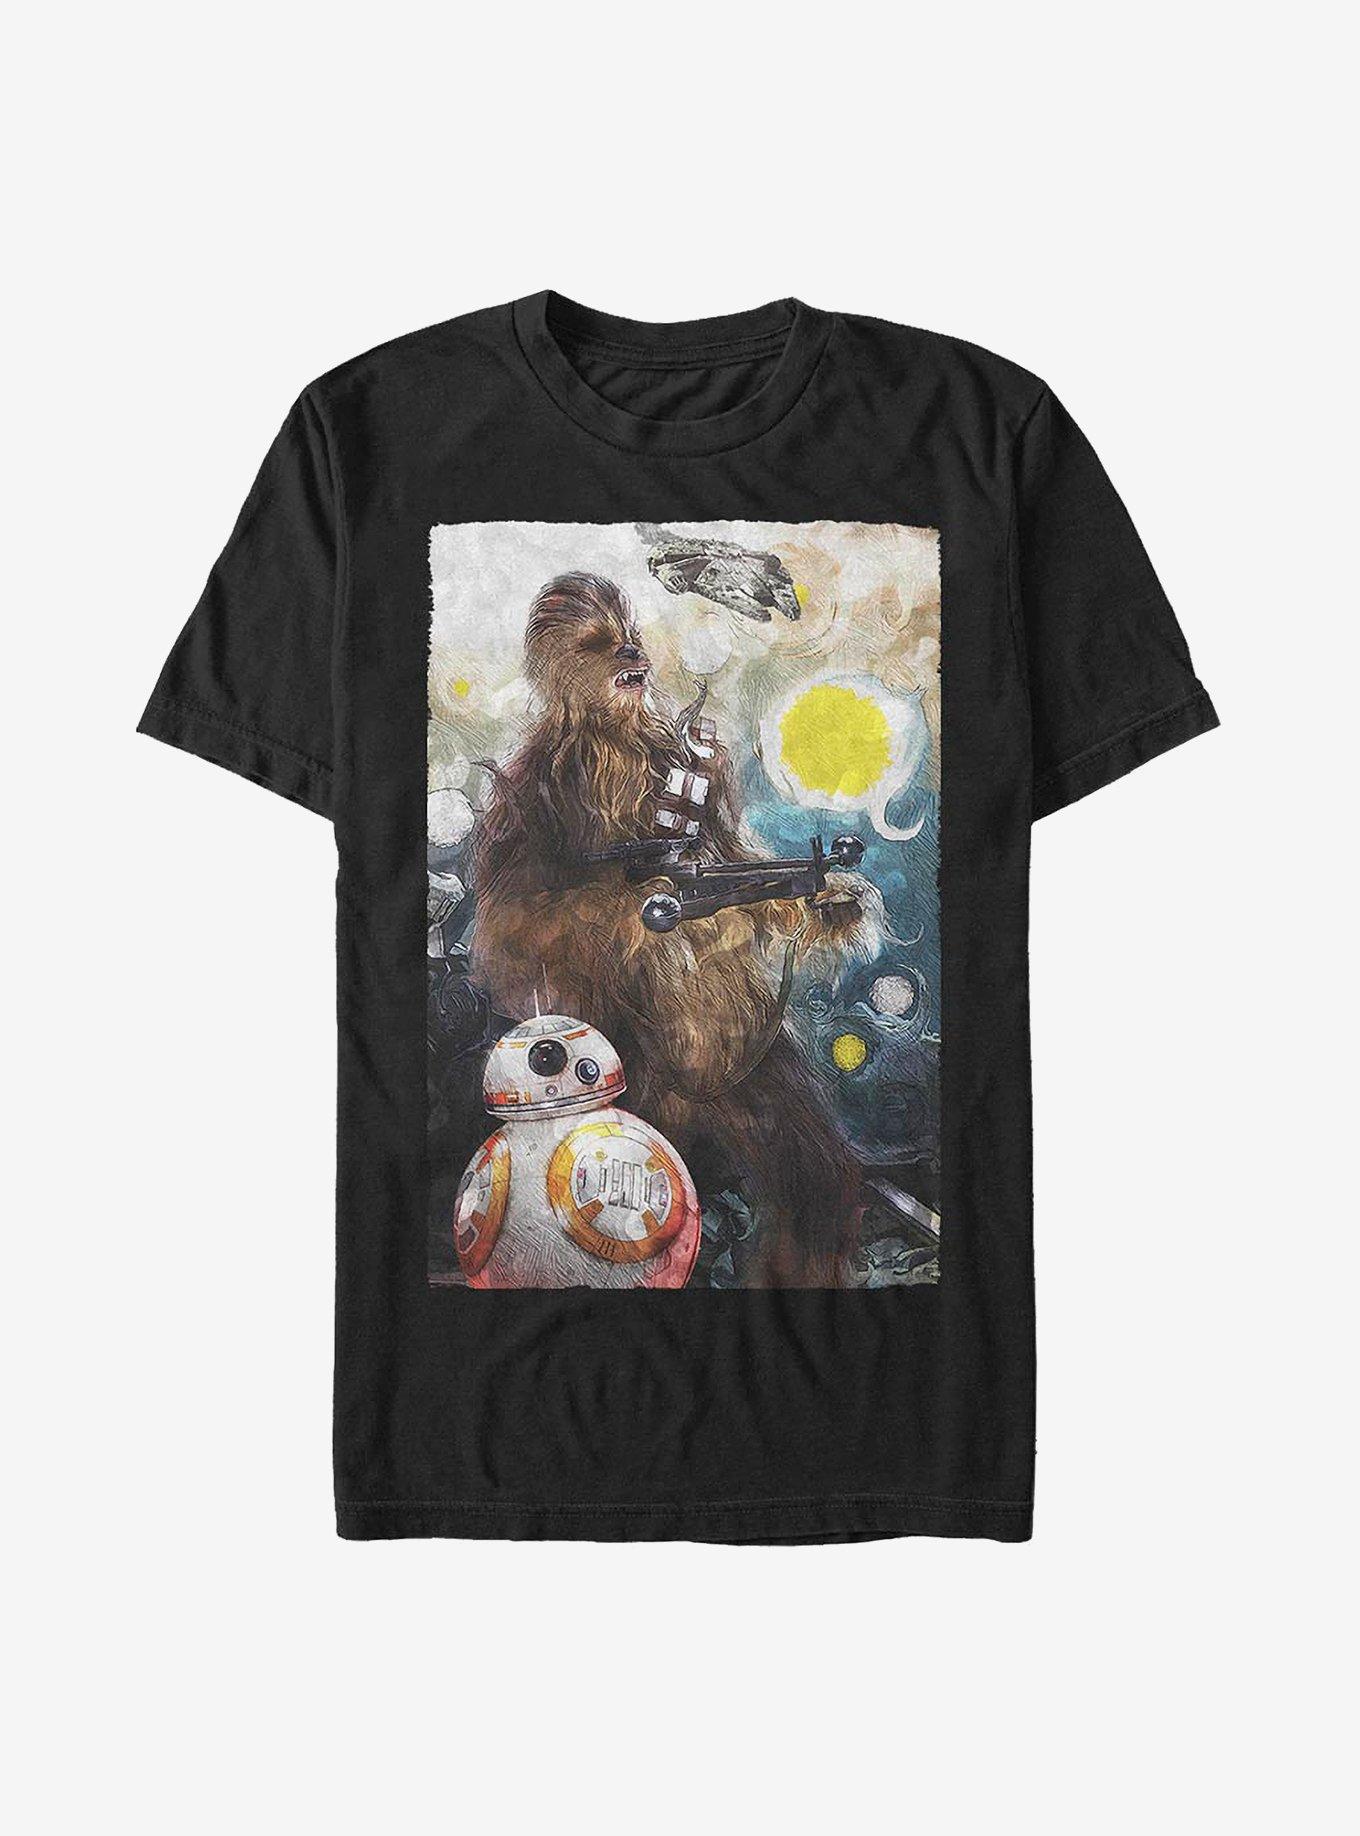 Star Wars: The Force Awakens Starry Chewie T-Shirt, BLACK, hi-res